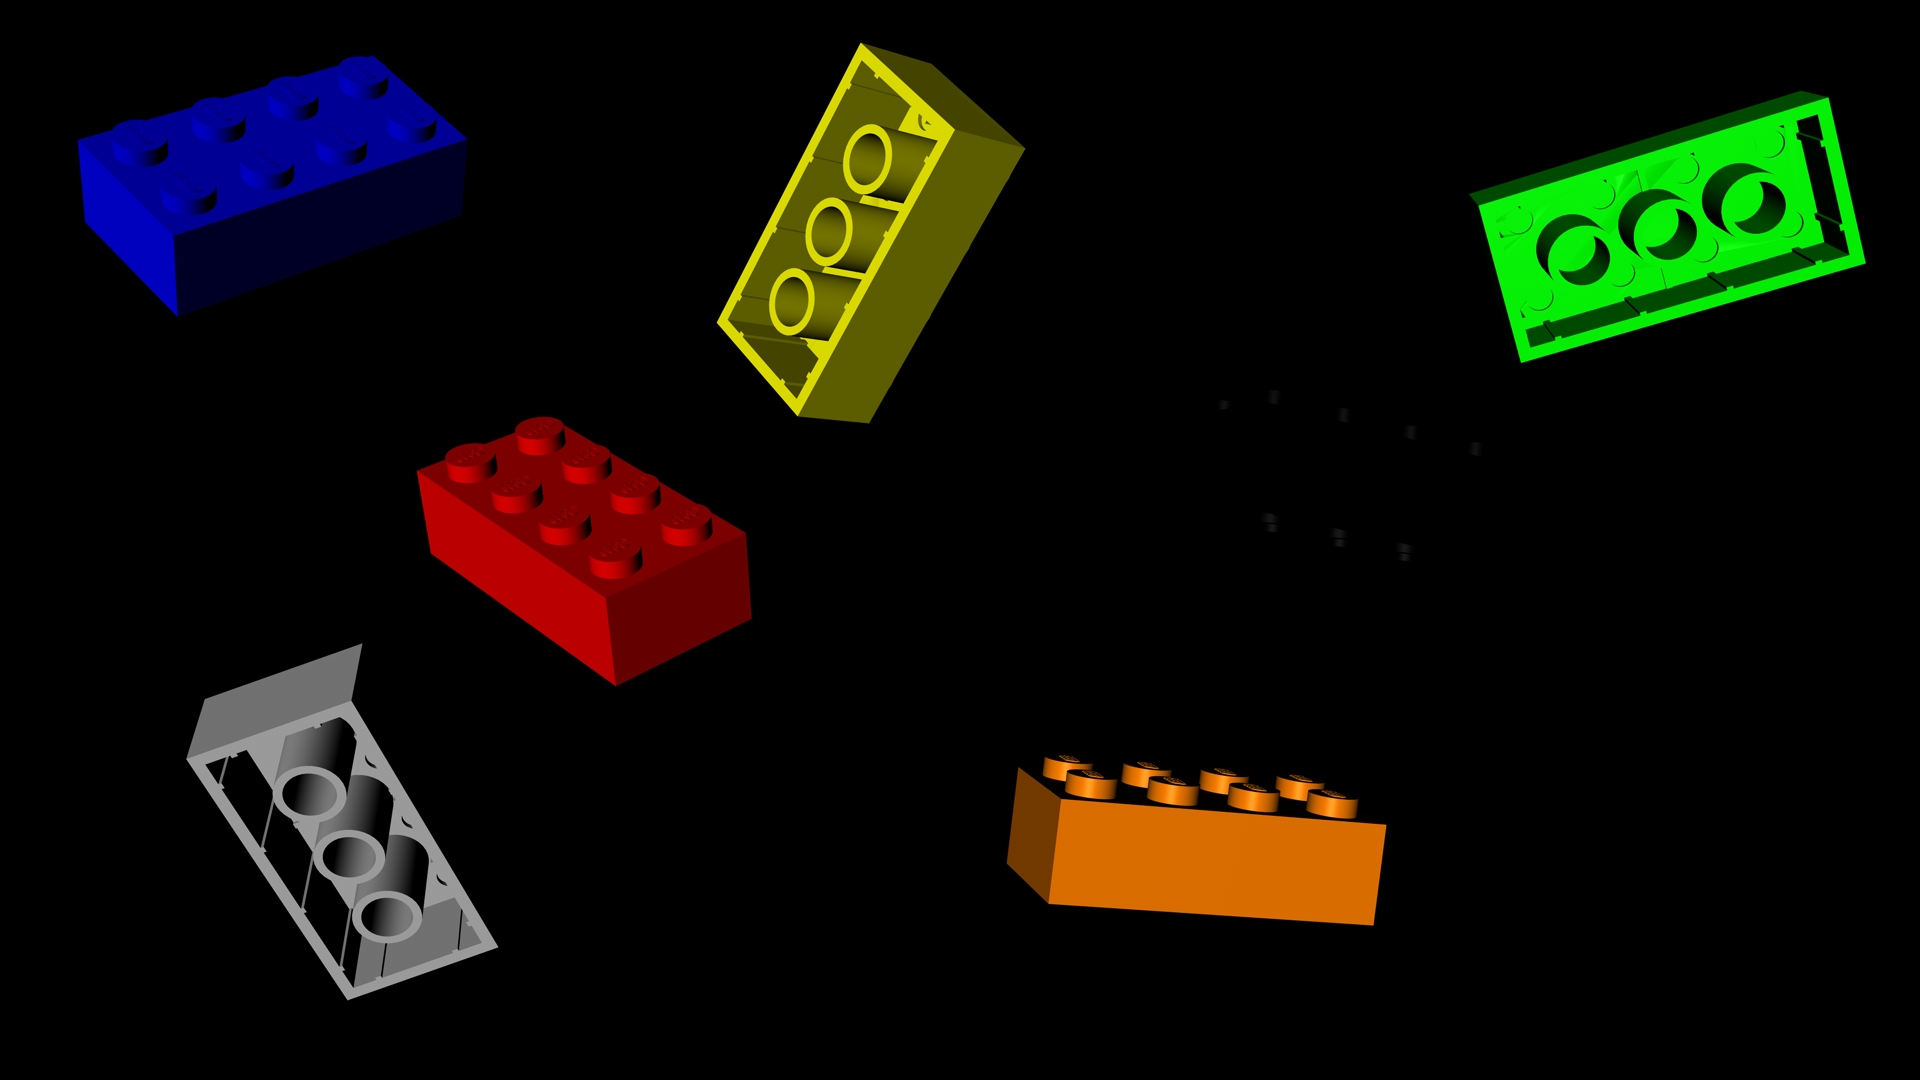 Scale LEGO Brick   Download by 100SeedlessPenguins 1920x1080